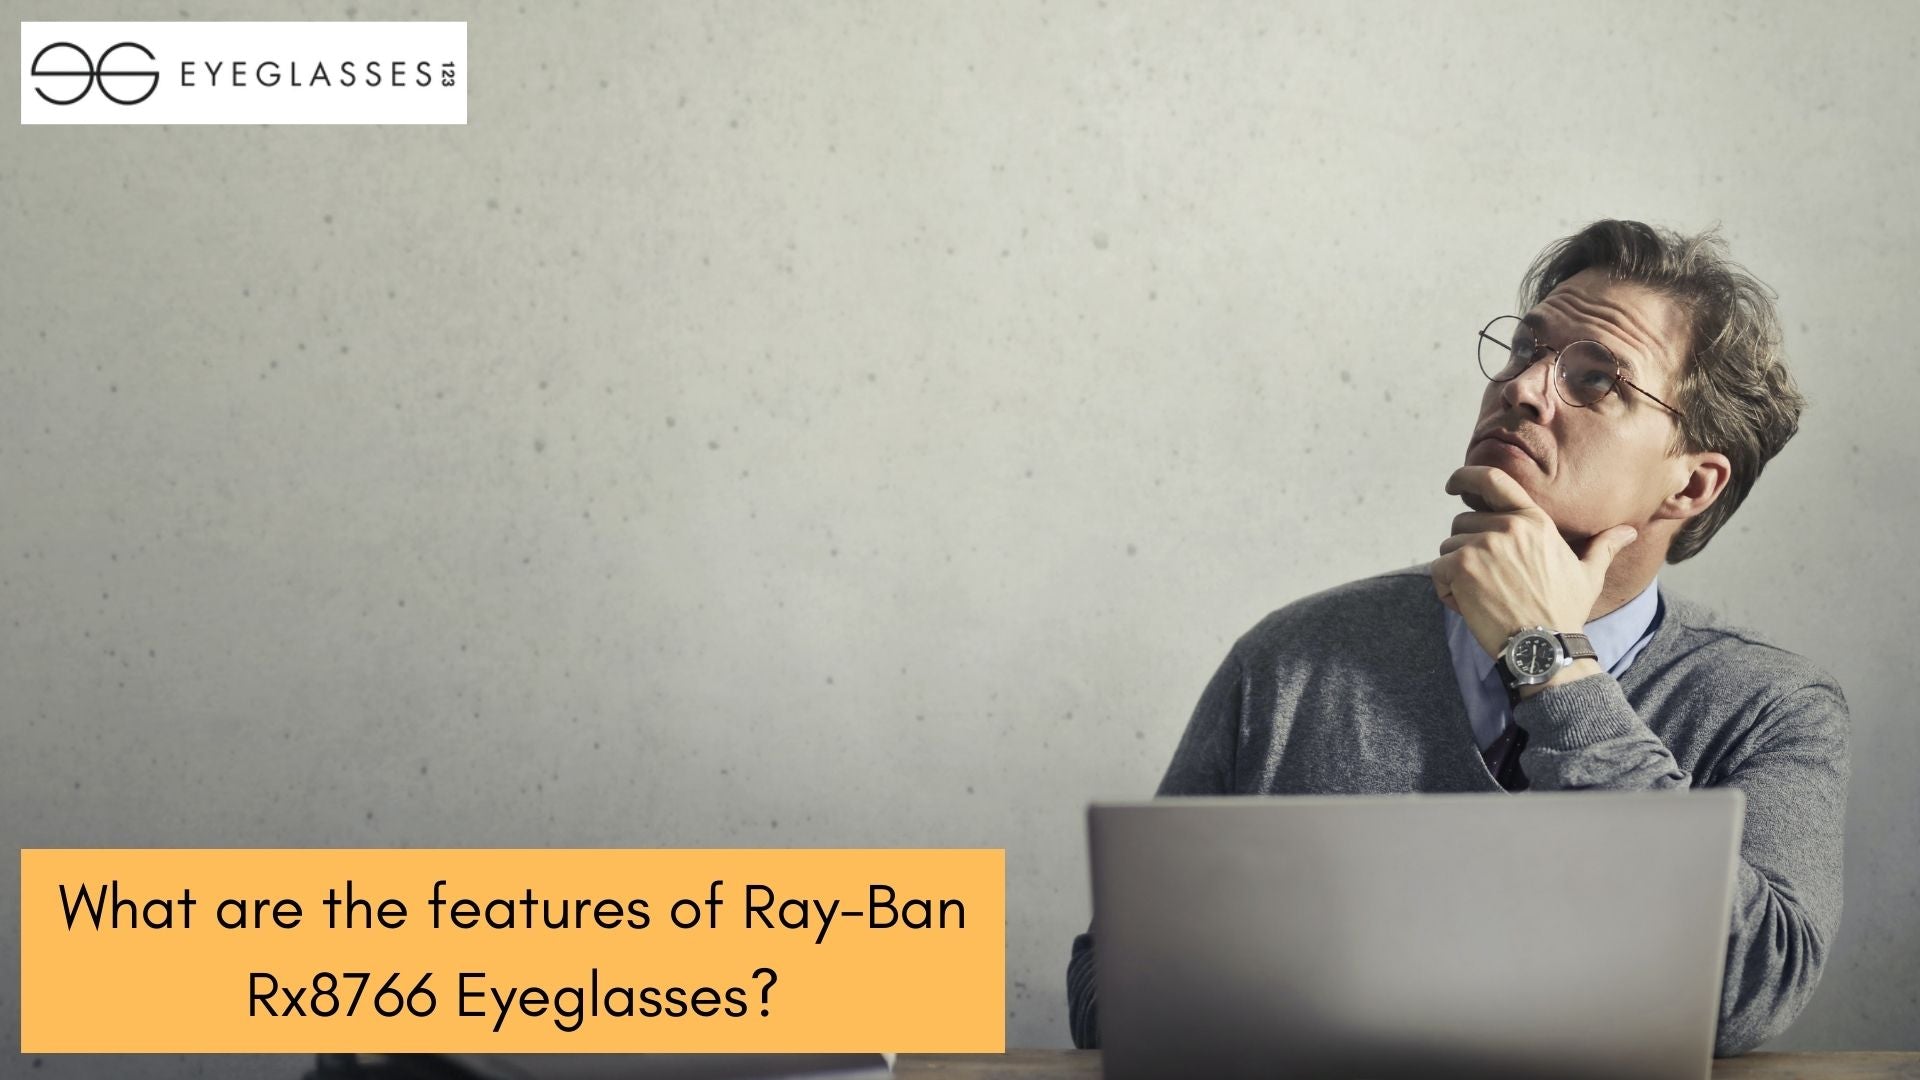 What are the features of Ray-Ban Rx8766 Eyeglasses?